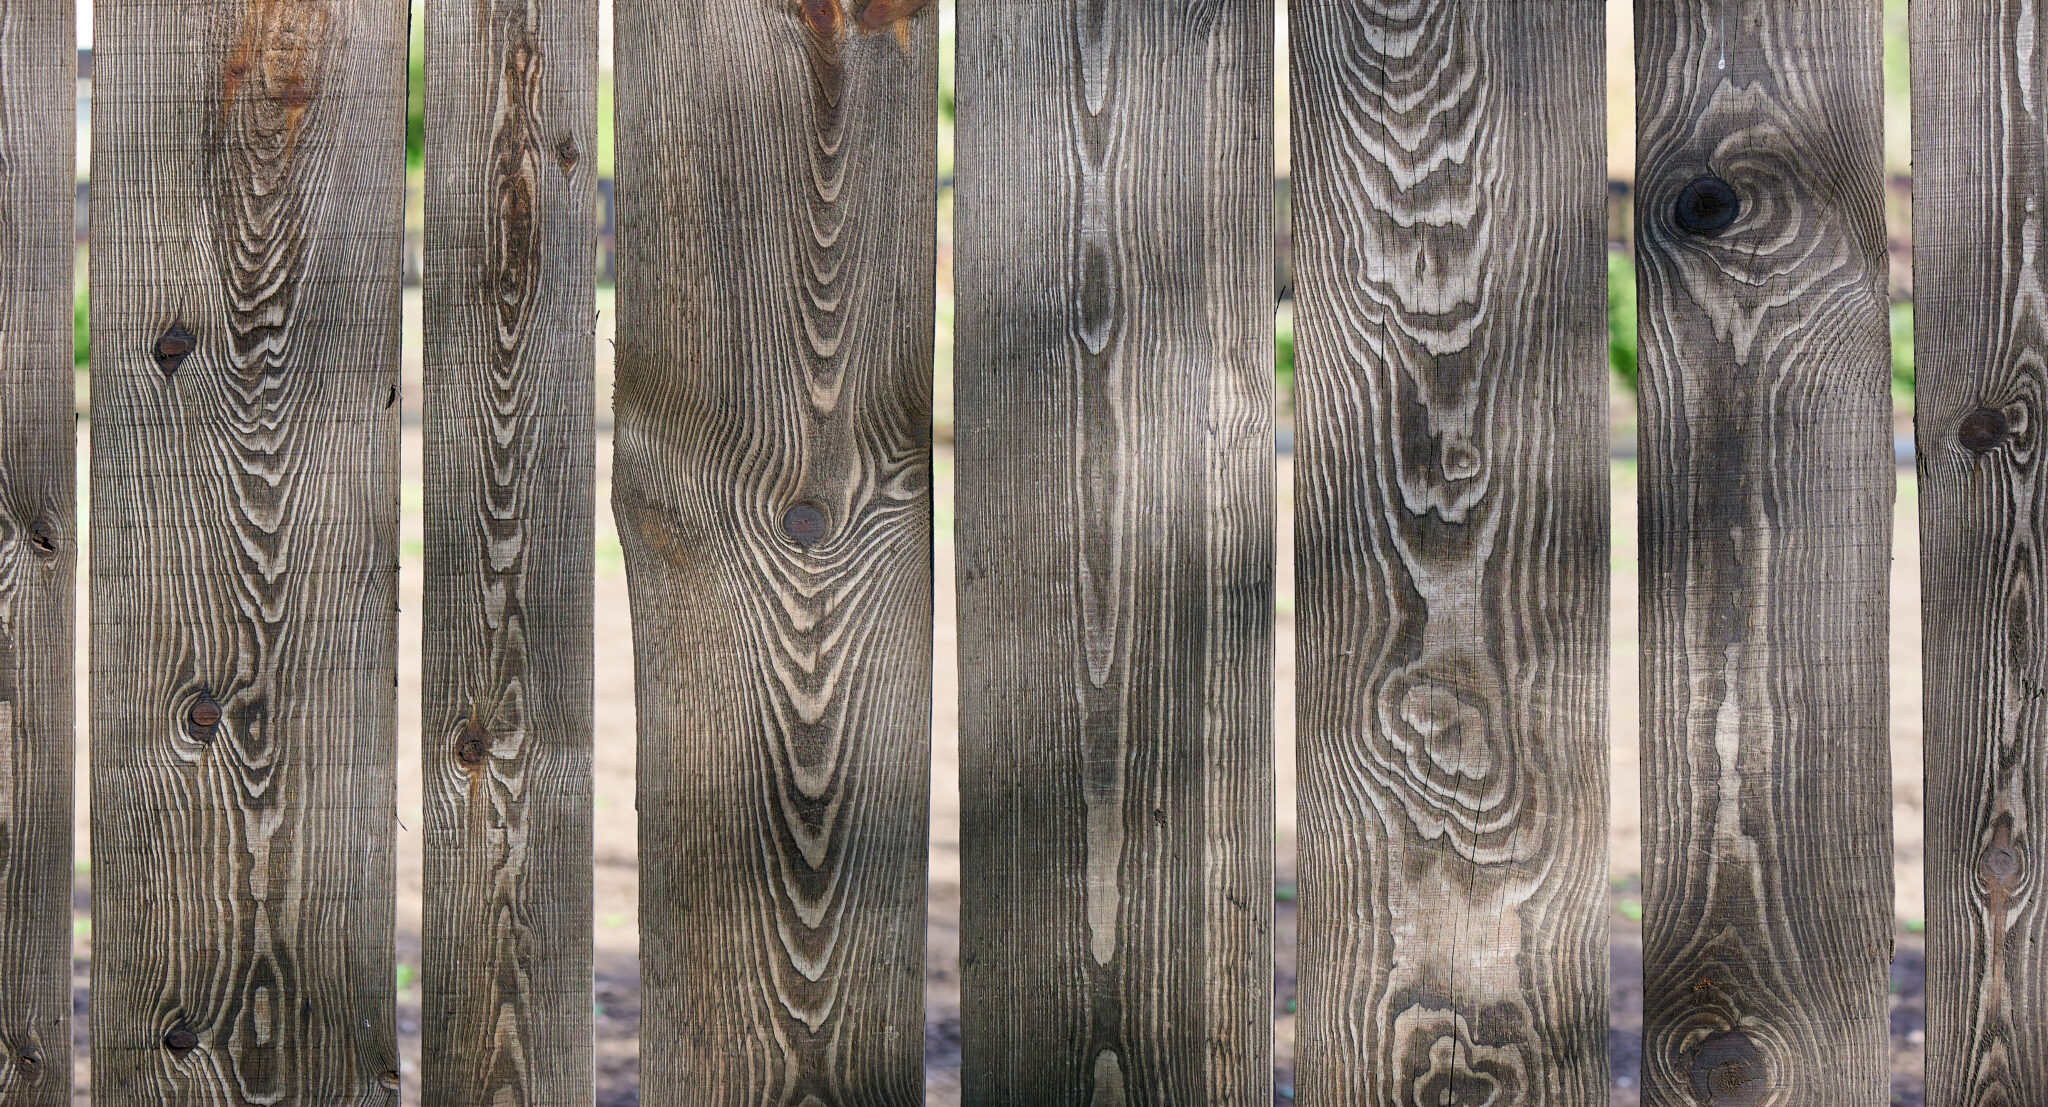 Textured wooden fence in the sunlight as a background.